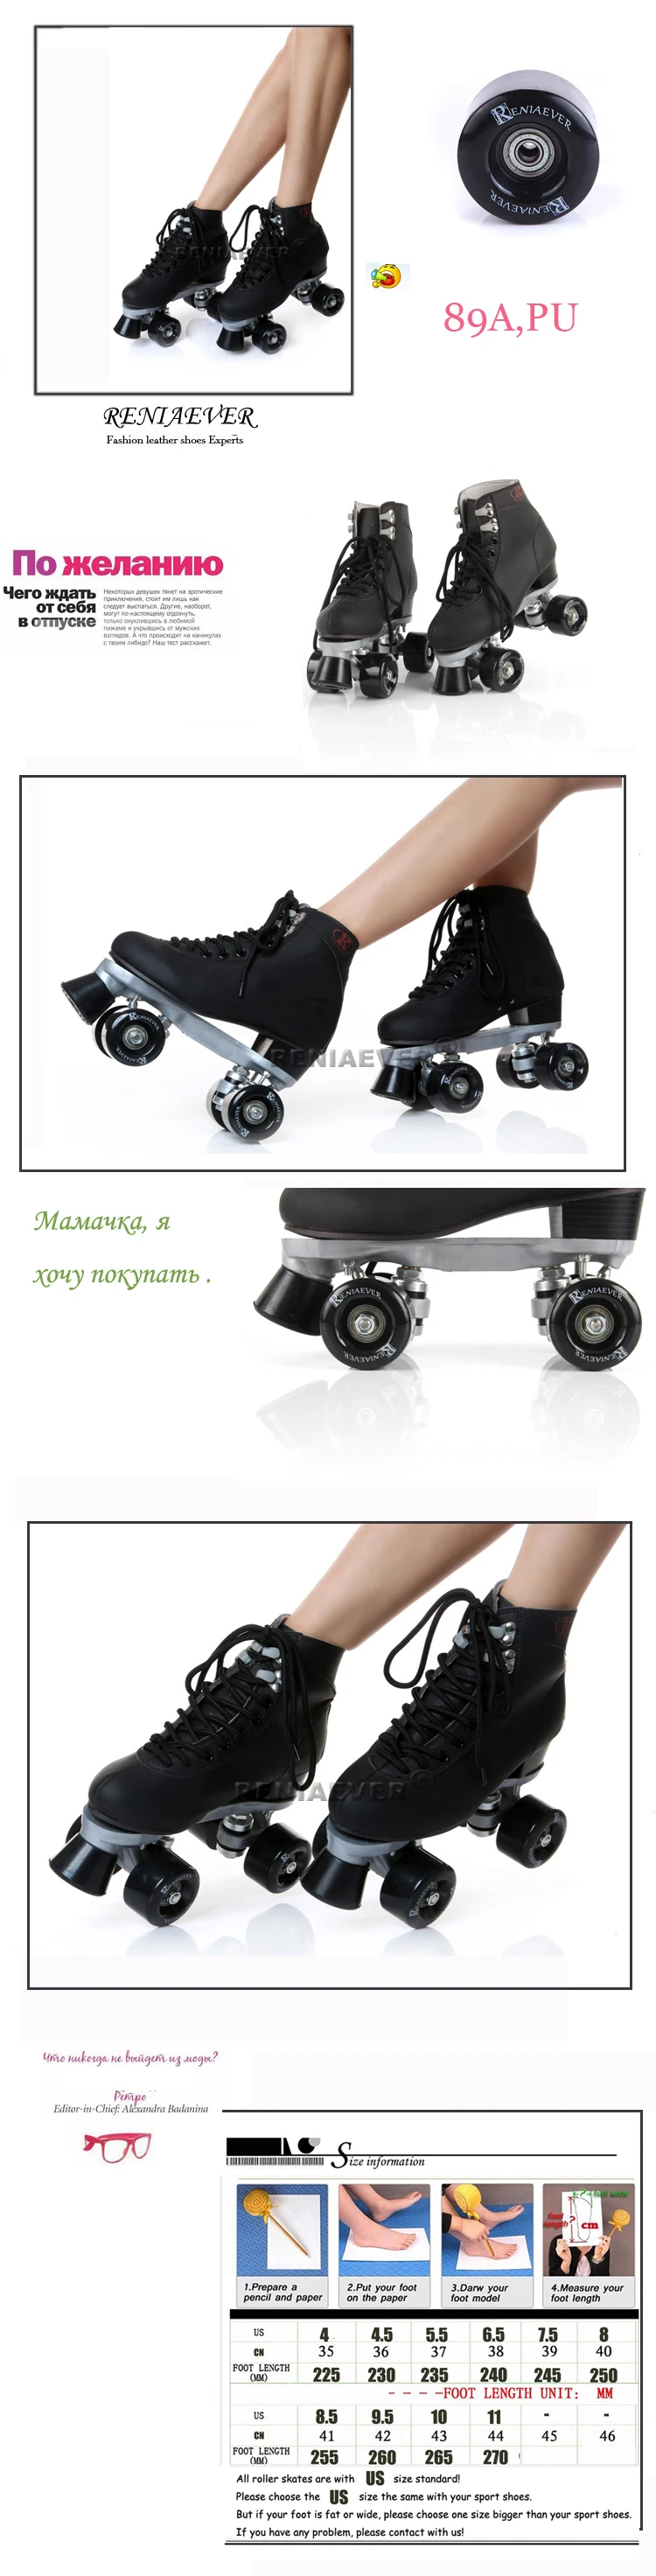 roller skates to put on shoes